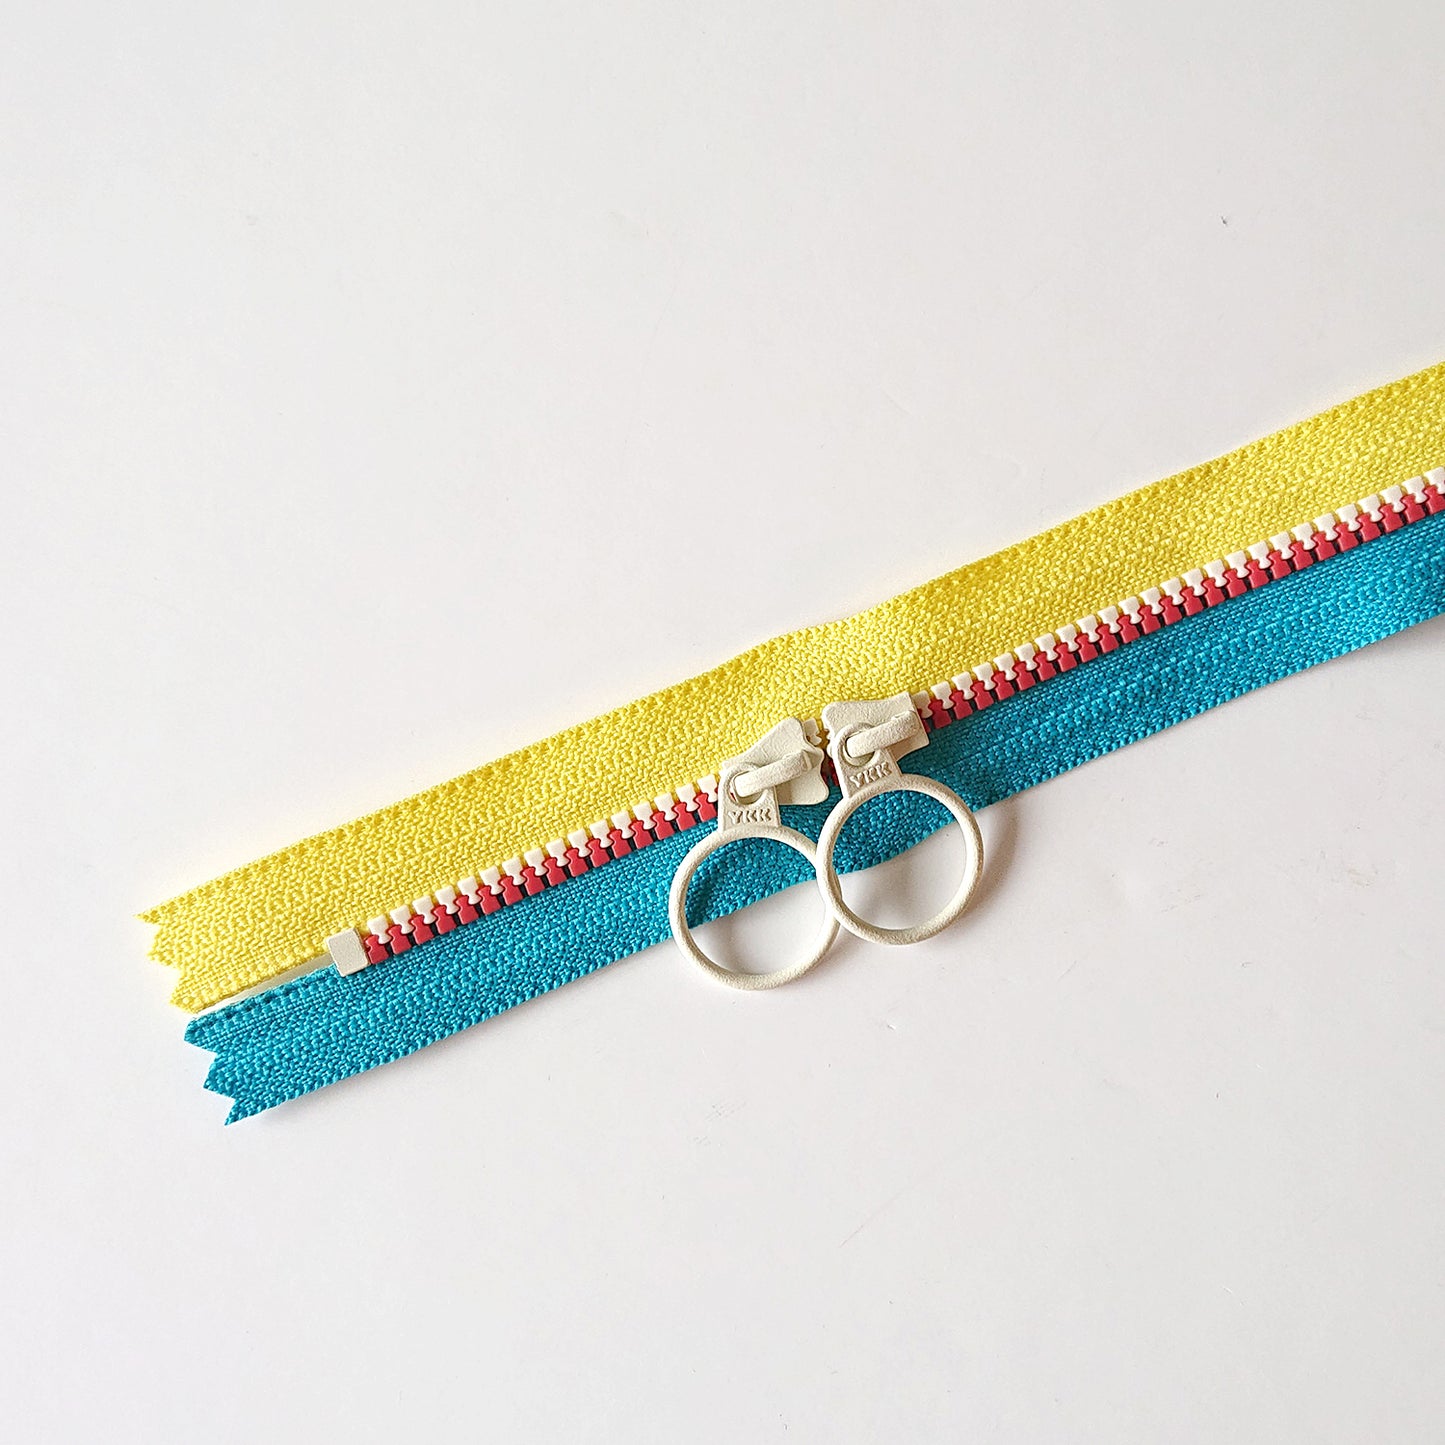 YKK Triple Zipper- Blue and Yellow with White & Red  Zip  (50cm)